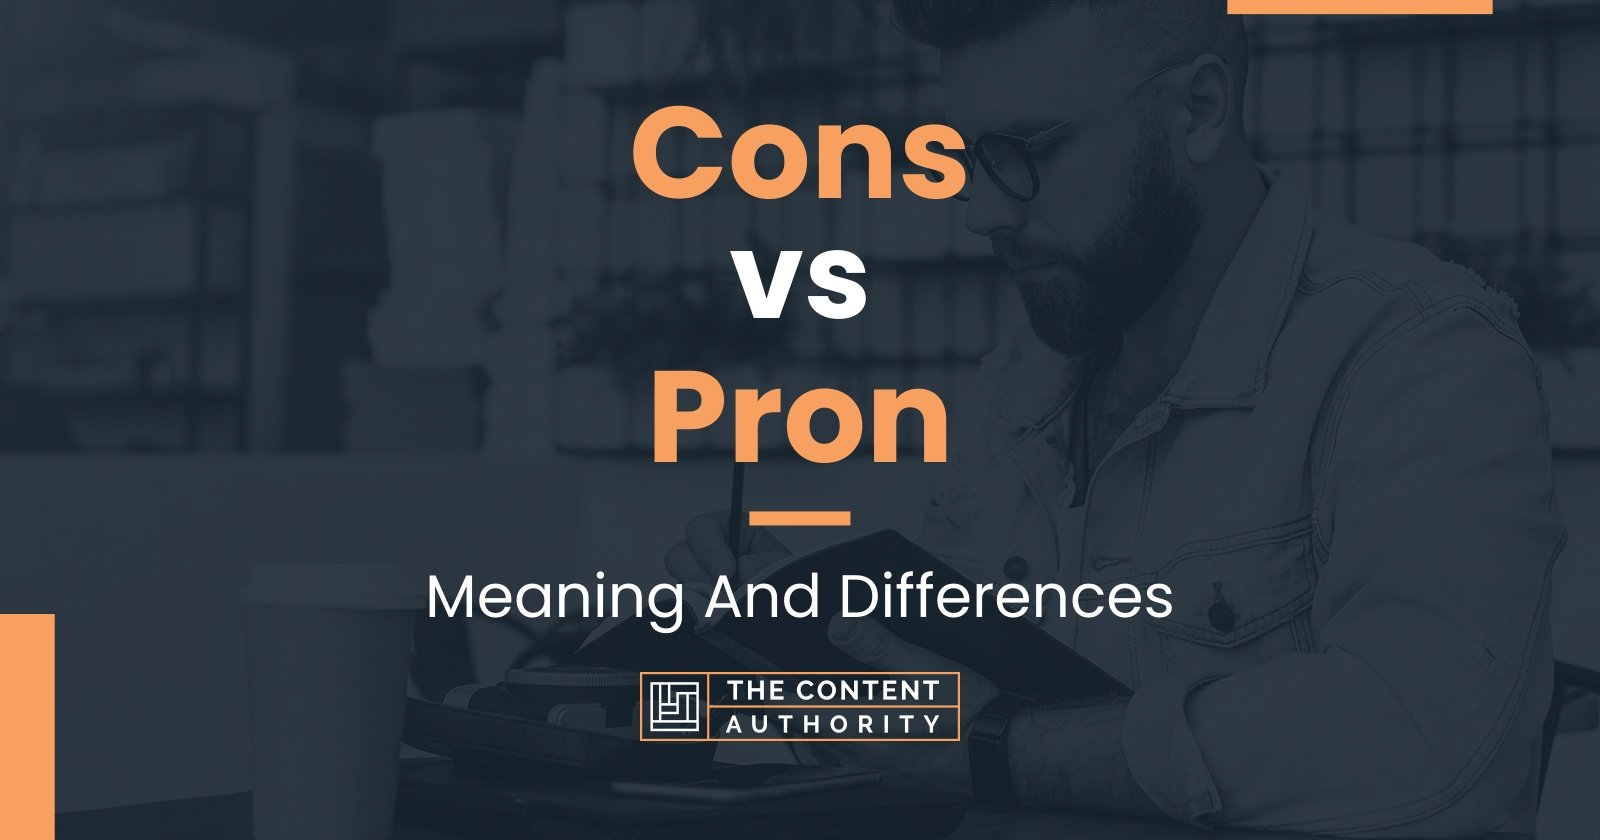 Cons vs Pron: Meaning And Differences